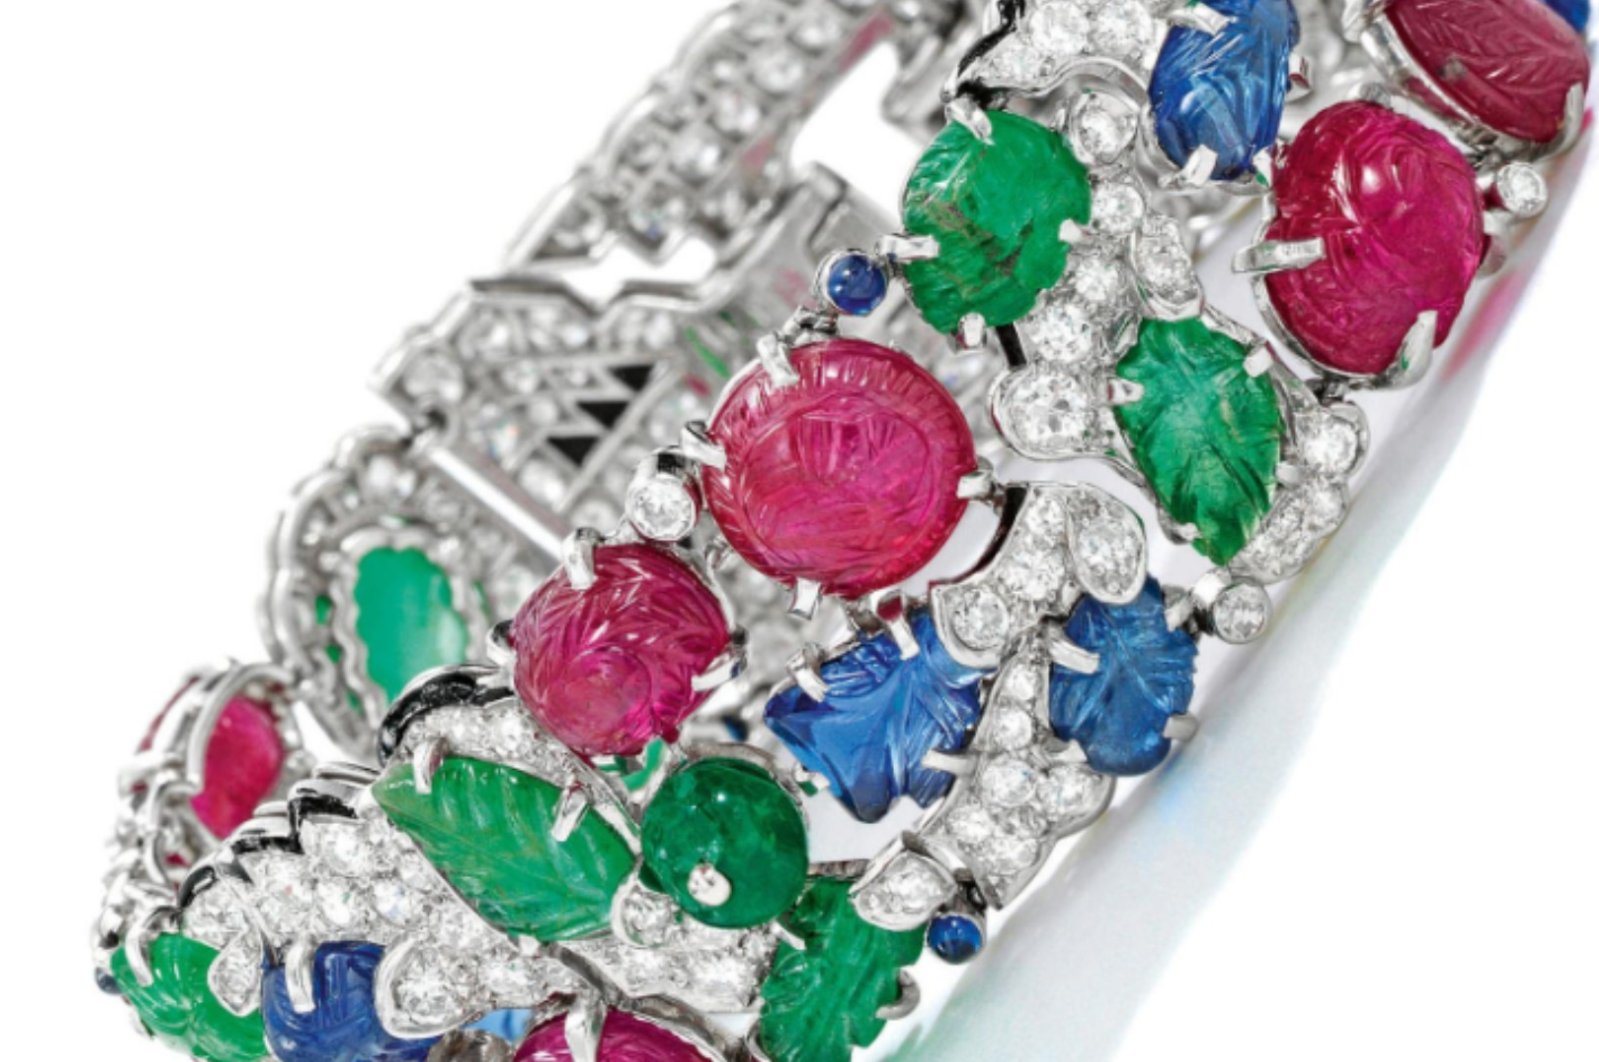 Cartier's "Tutti-Frutti" bracelet seen in this undated photo. (Photo from Sotheby's official Instagram account)